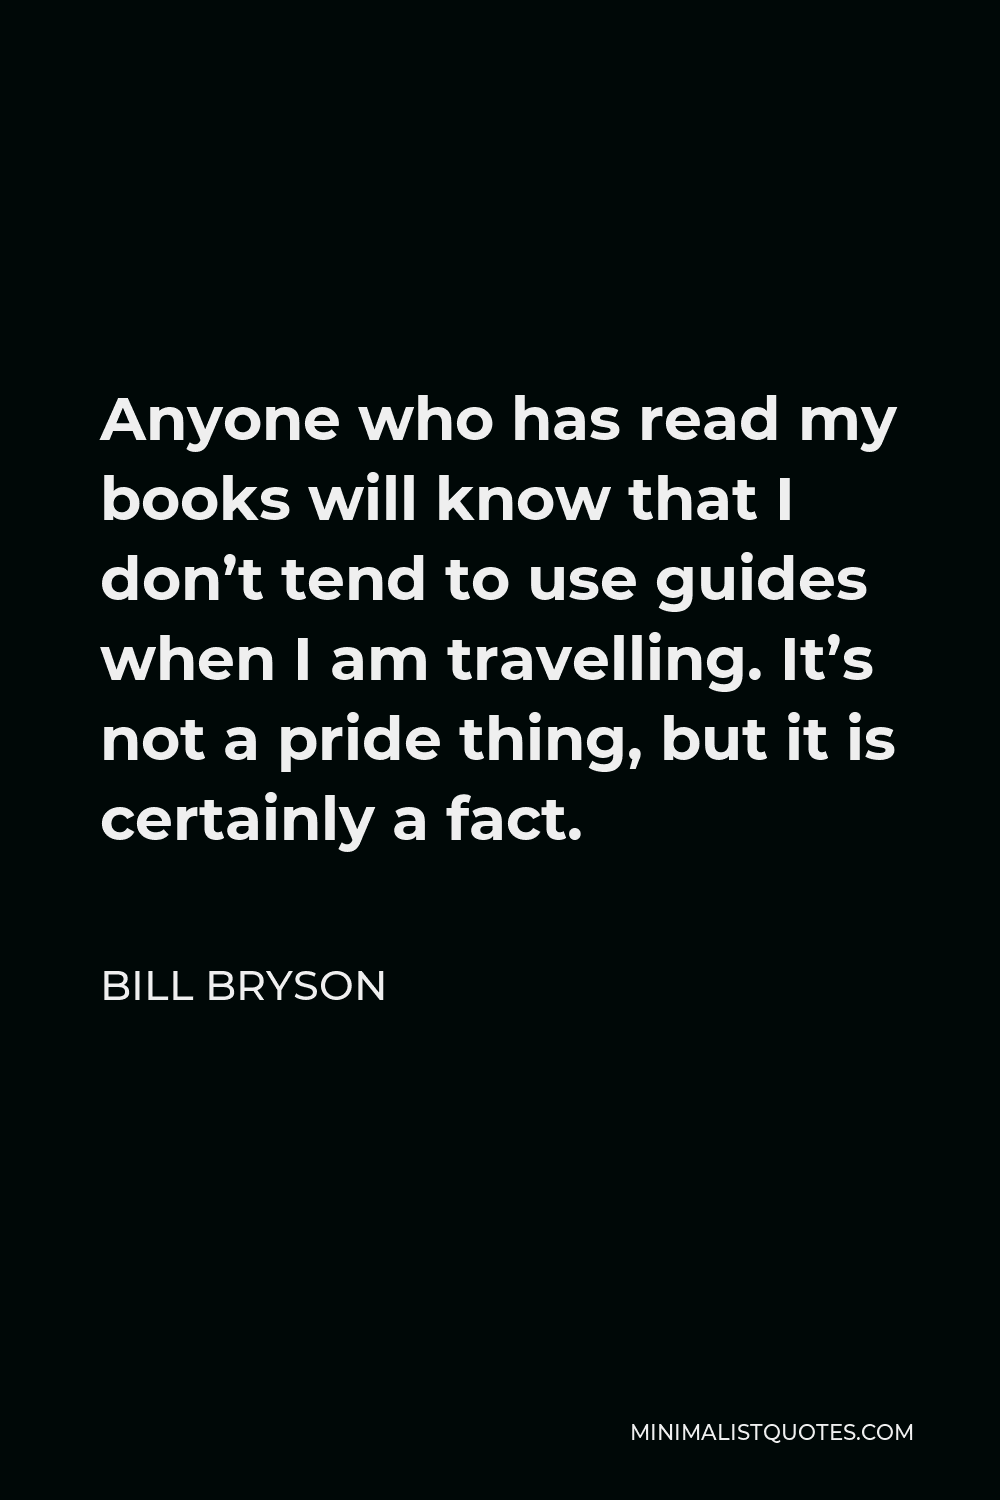 Bill Bryson Quote - Anyone who has read my books will know that I don’t tend to use guides when I am travelling. It’s not a pride thing, but it is certainly a fact.